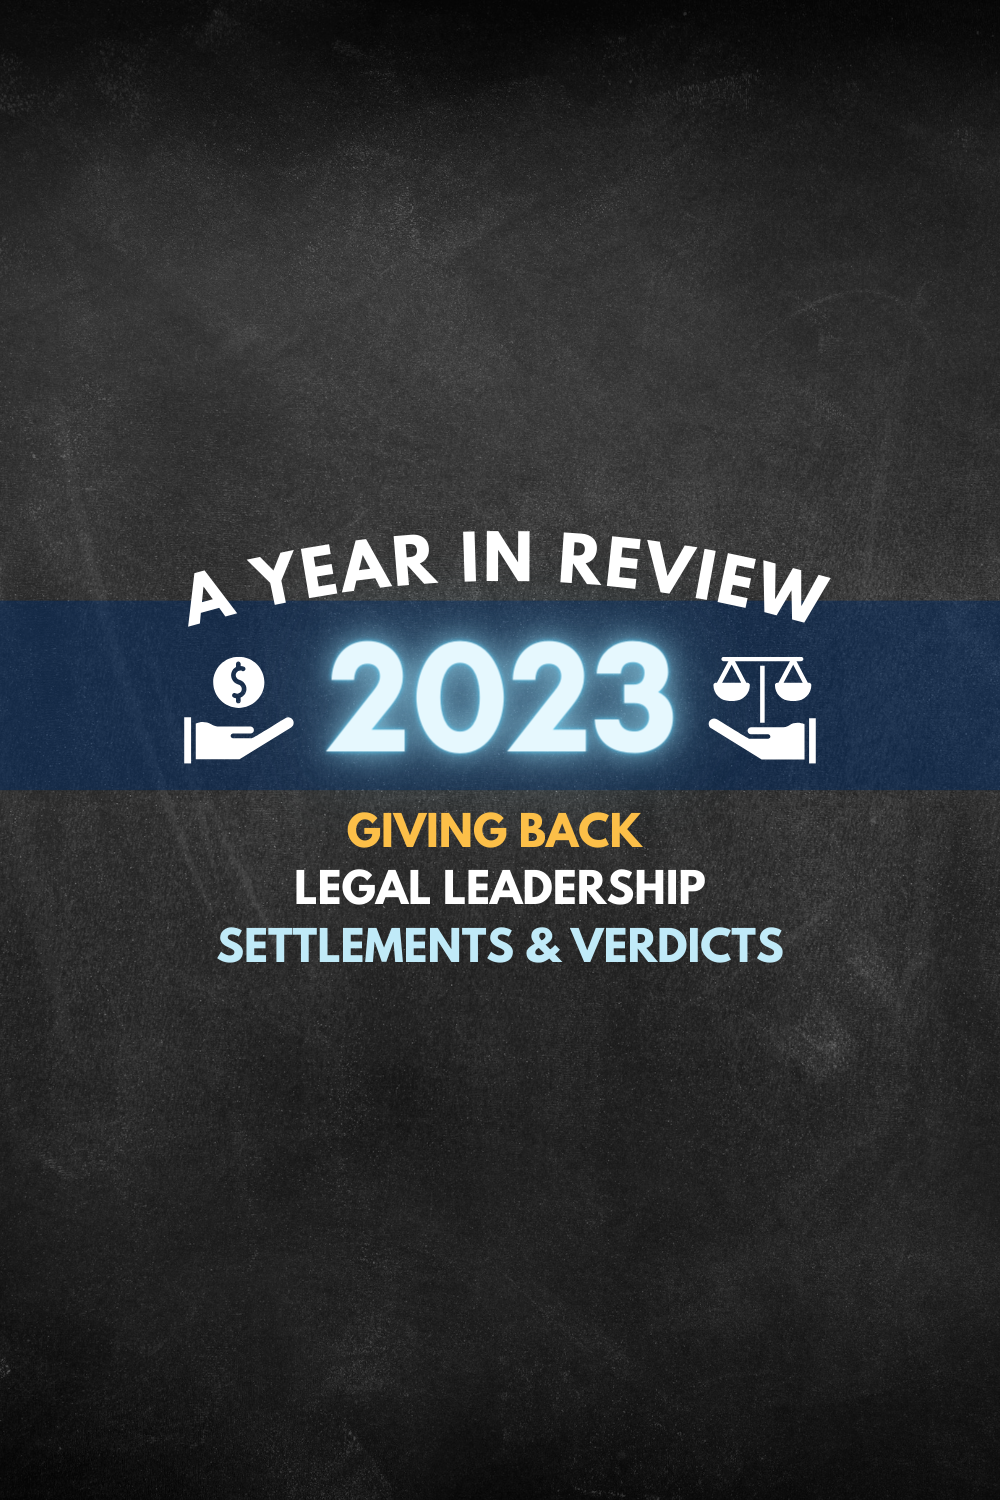 Michigan Auto Law’s 2023 Year In Review